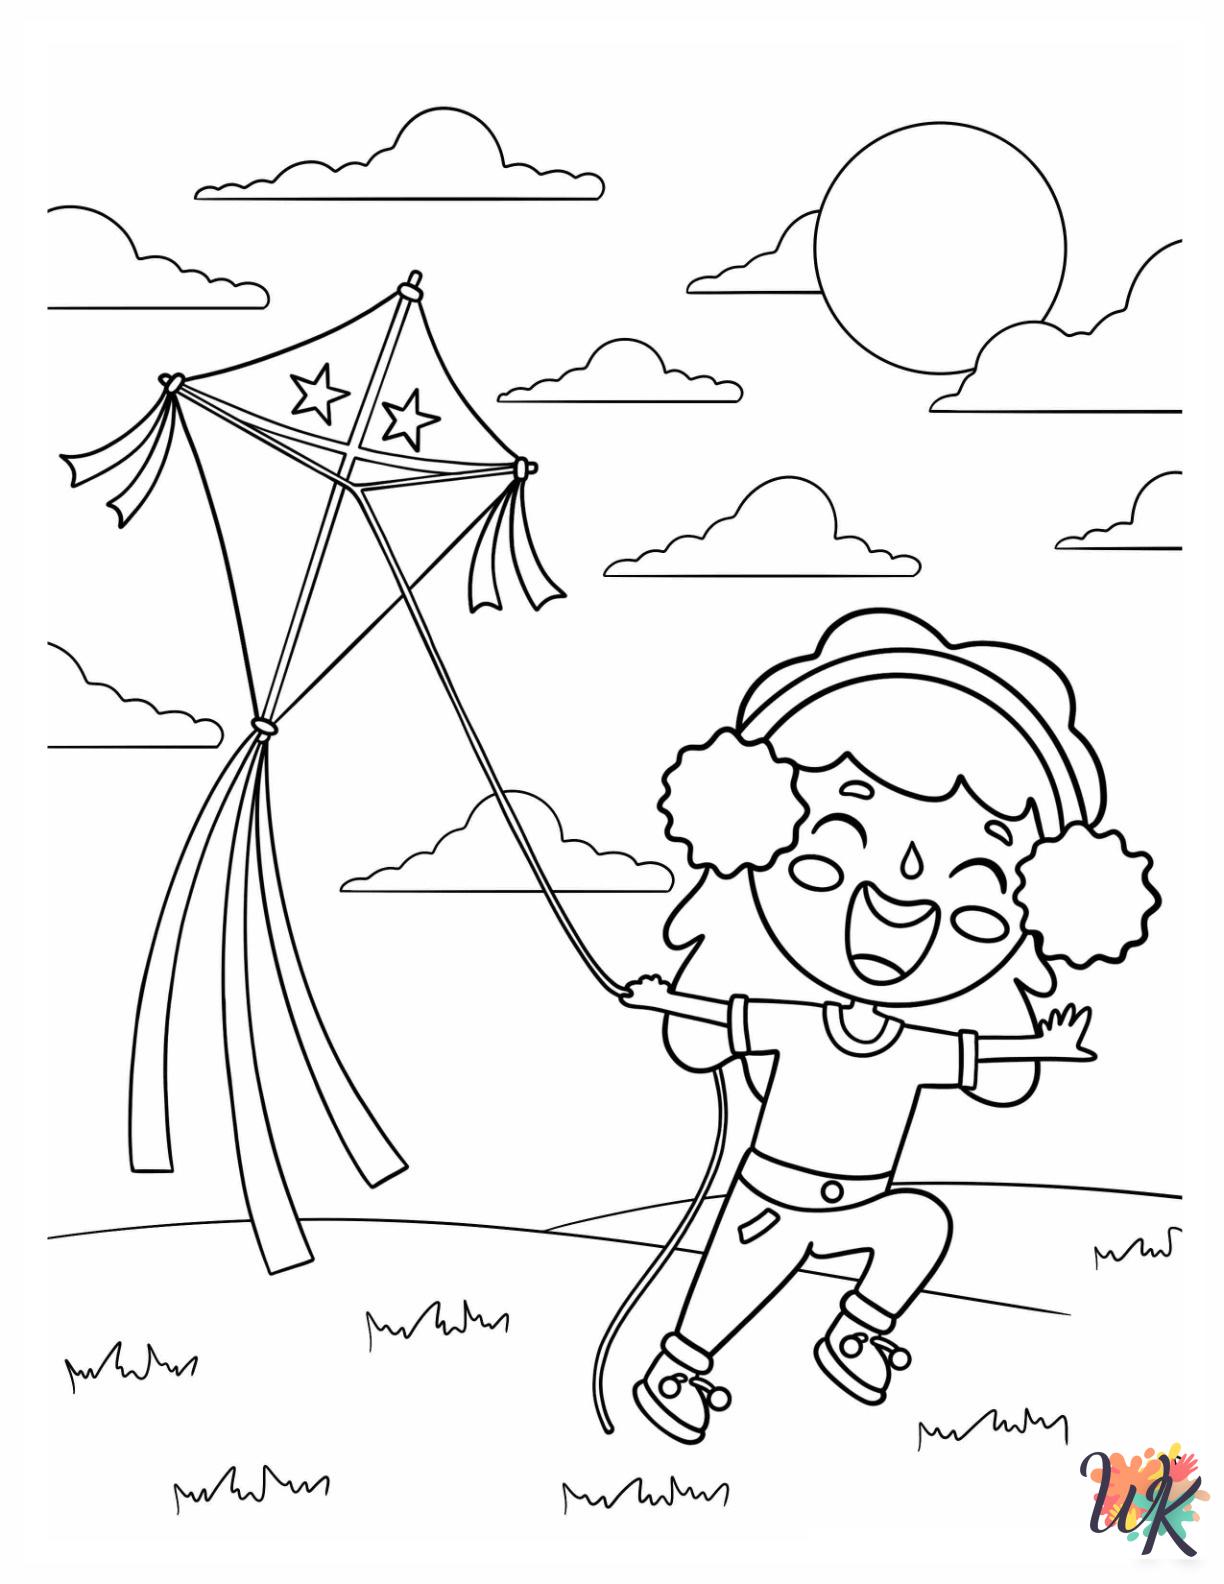 free full size printable Kite coloring pages for adults pdf